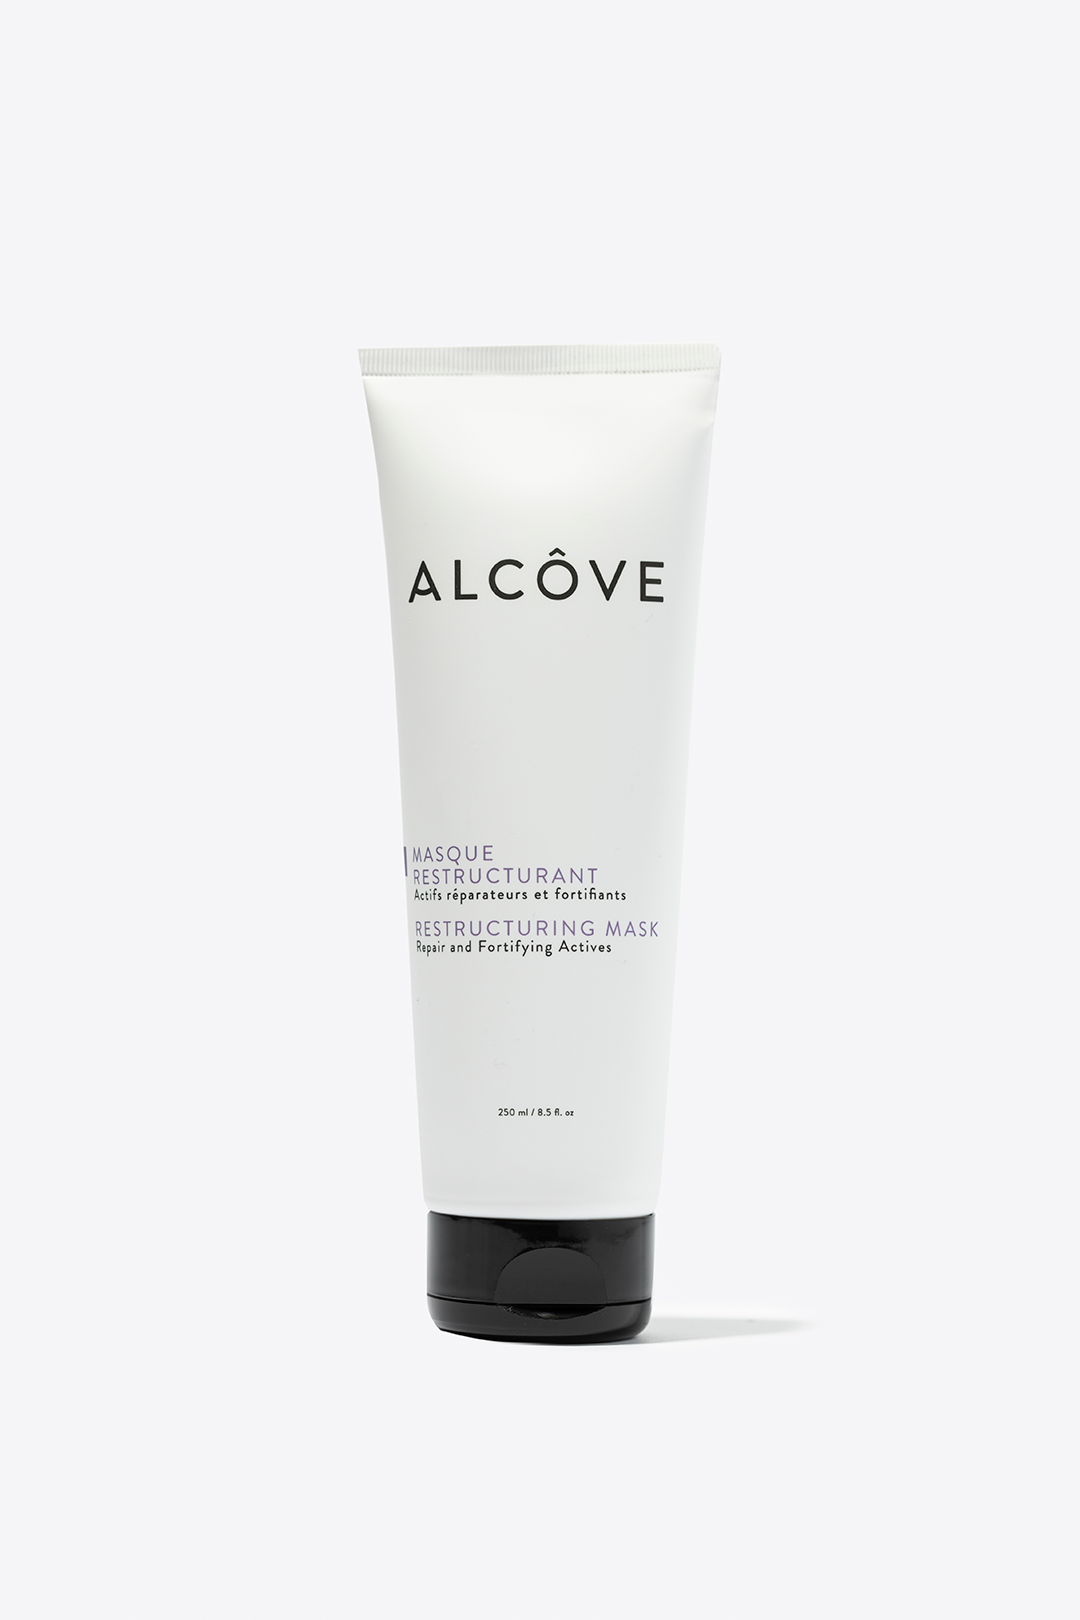 Alcove - RESTRUCTURING MASK - by Alcove |ProCare Outlet|